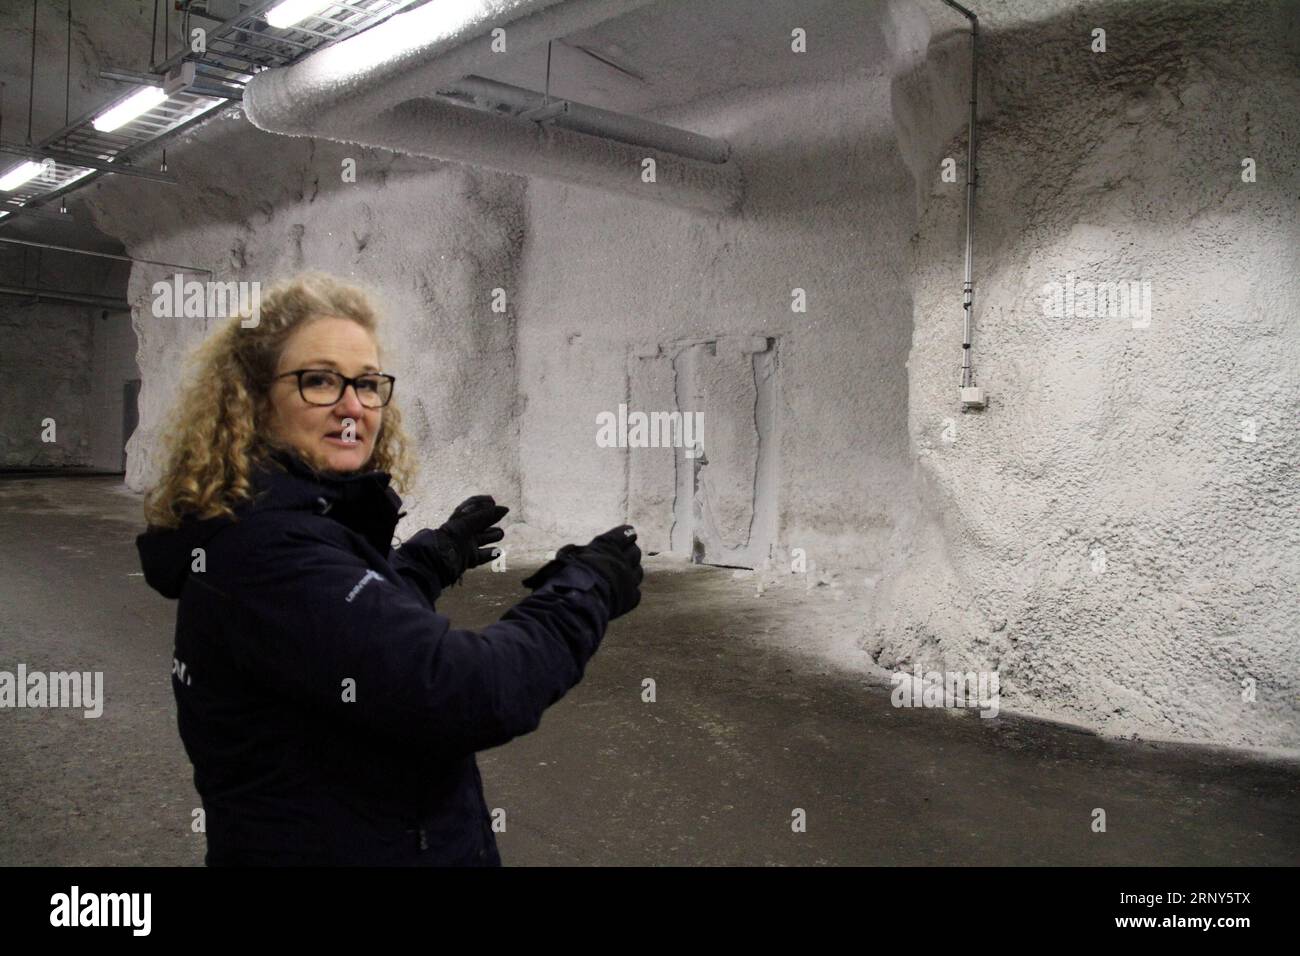 (180301) -- SVALBARD, March 1, 2018 -- Lise Lykke Steffensen, director of the Nordic Genetic Resource Center, gestures at Svalbard Global Seed Vault on Norway s remote Arctic archipelago of Svalbard on Feb. 27, 2018. The underground agricultural seed bank in Norway will receive a 13-million-U.S.-dollar grant for upgrade as it celebrates its 10th anniversary this year, the Norwegian government has said. The Svalbard Global Seed Vault, dubbed the Doomsday and the Noah s Ark vault, was established as a backup of crop seed samples stored in other seed banks around the world. It is considered to be Stock Photo